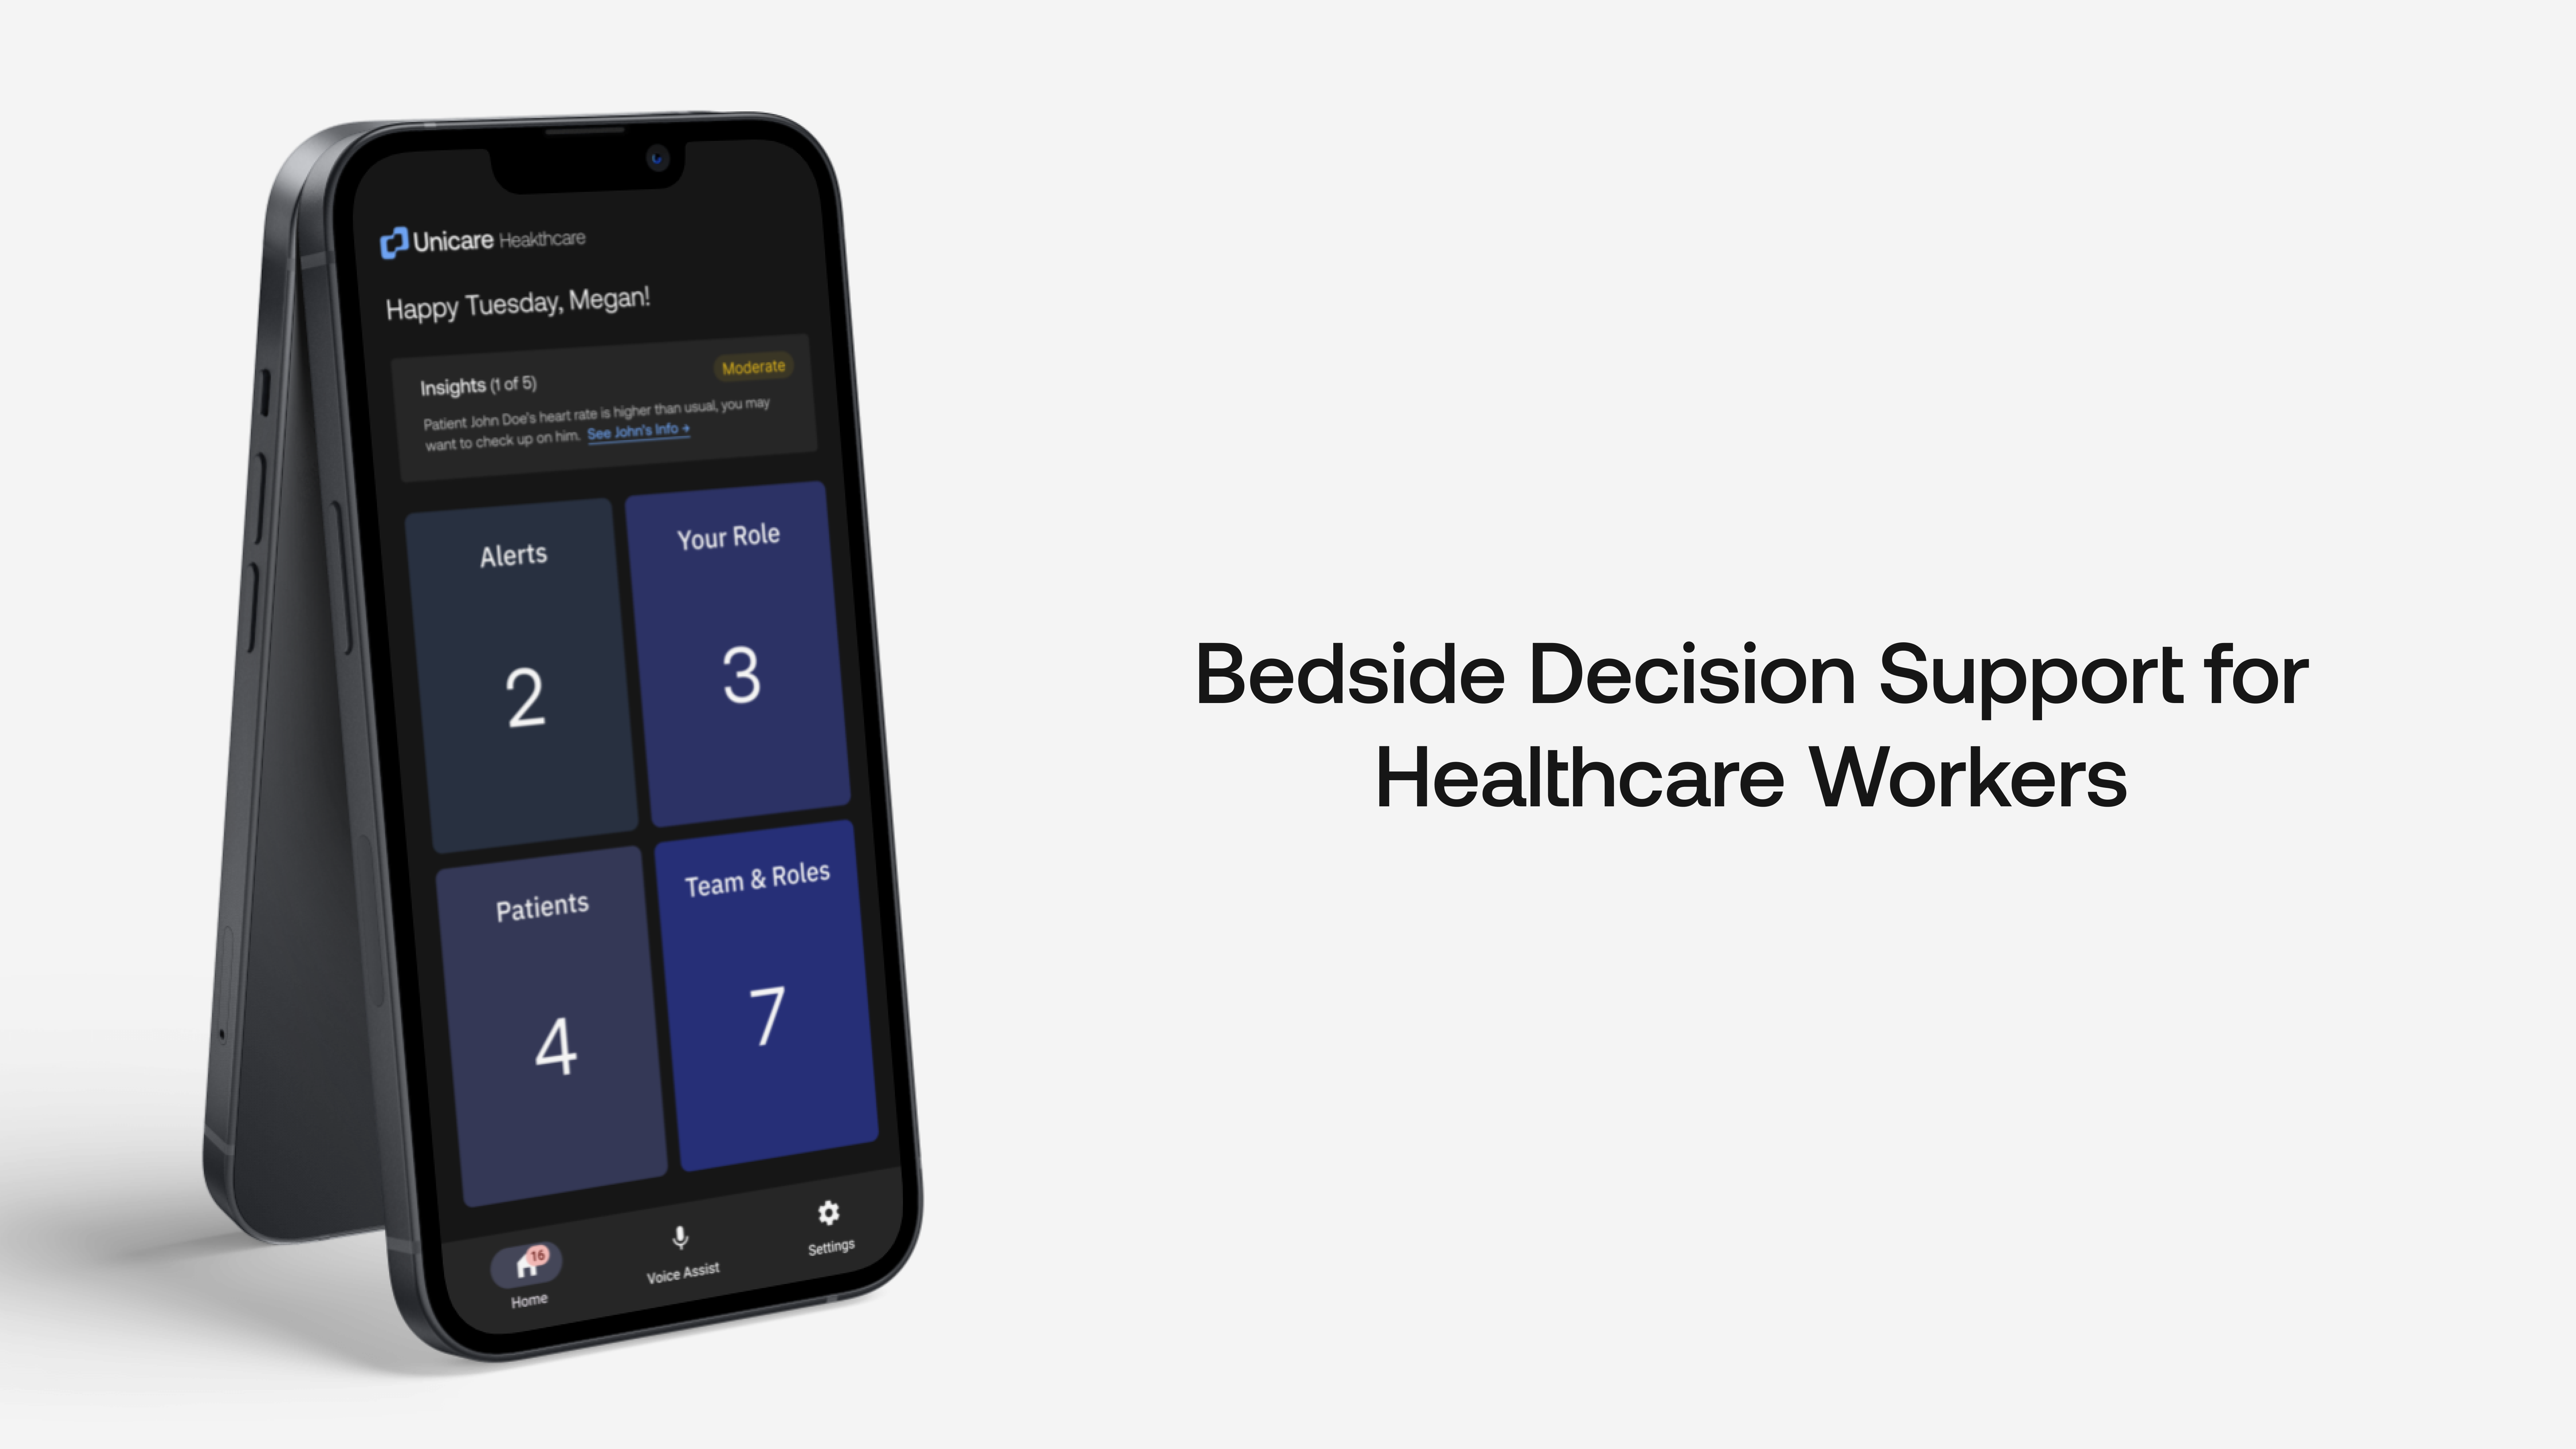 Bedside Decision Support for Healthcare Workers